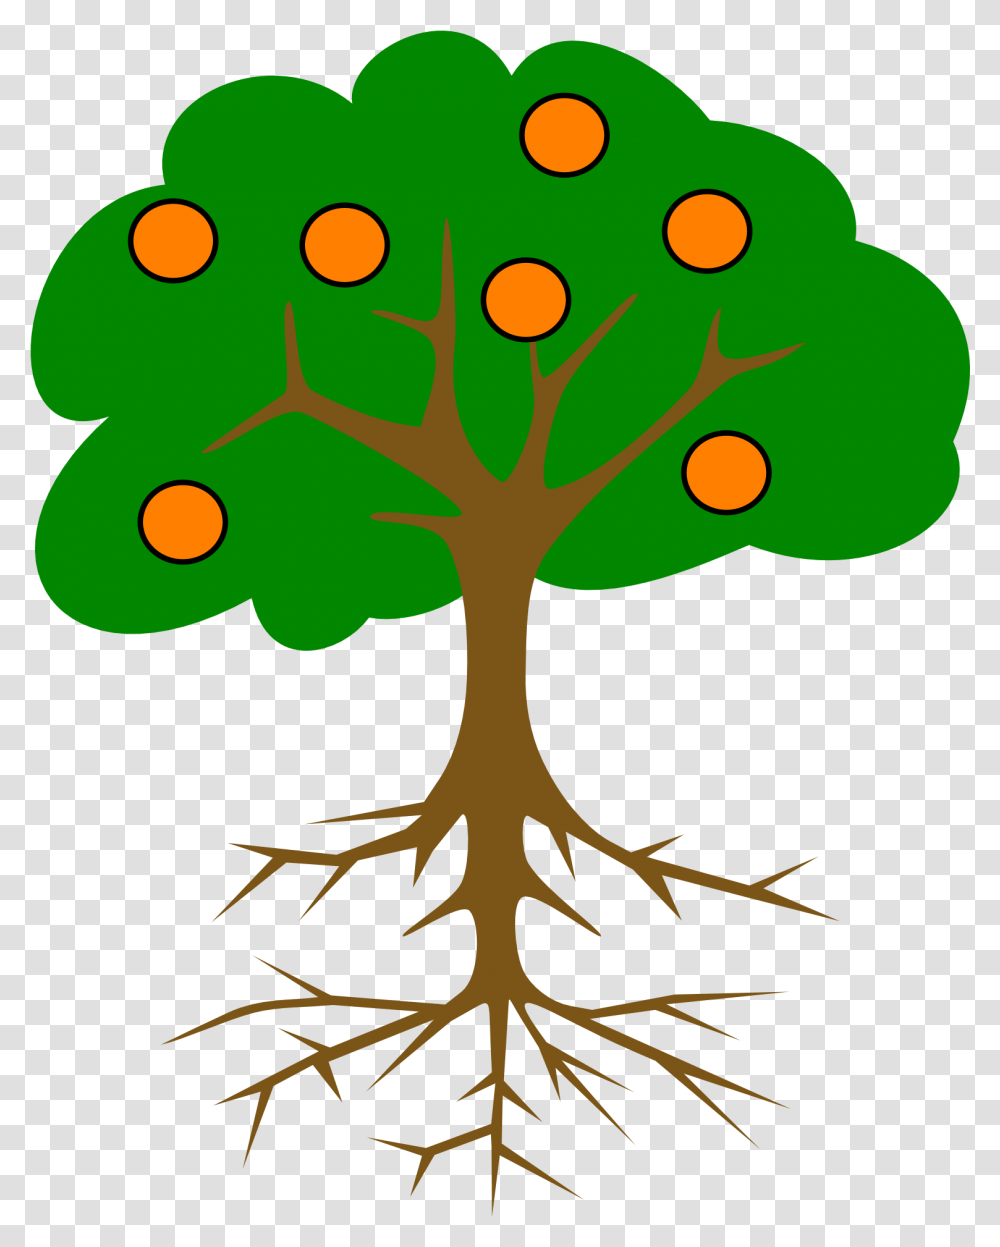 Tree Sketch Drawings Learn Color Mango Stock Vector (Royalty Free)  2248625979 | Shutterstock